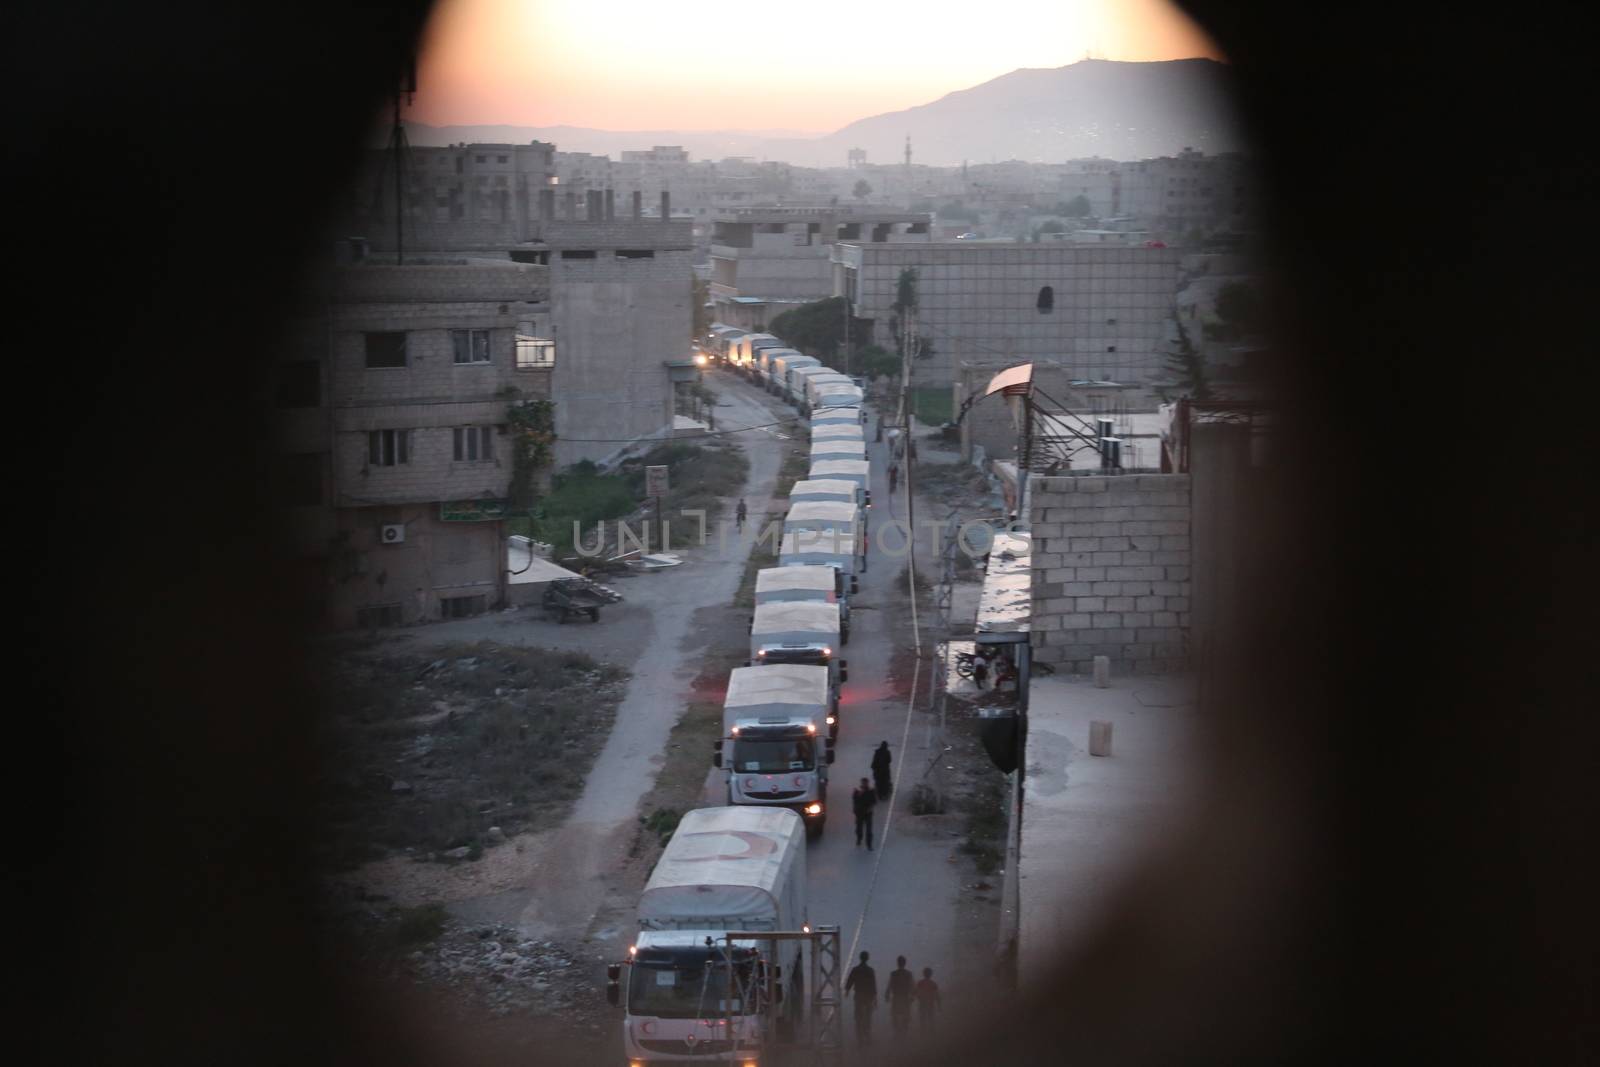 SYRIA, Saqba: Syrian Arab Red Crescent lorries carrying aid sent by the United Nations in the town of Saqba, in the eastern Ghouta area, a rebel stronghold east of the Syrian capital Damascus, on April 19, 2016.